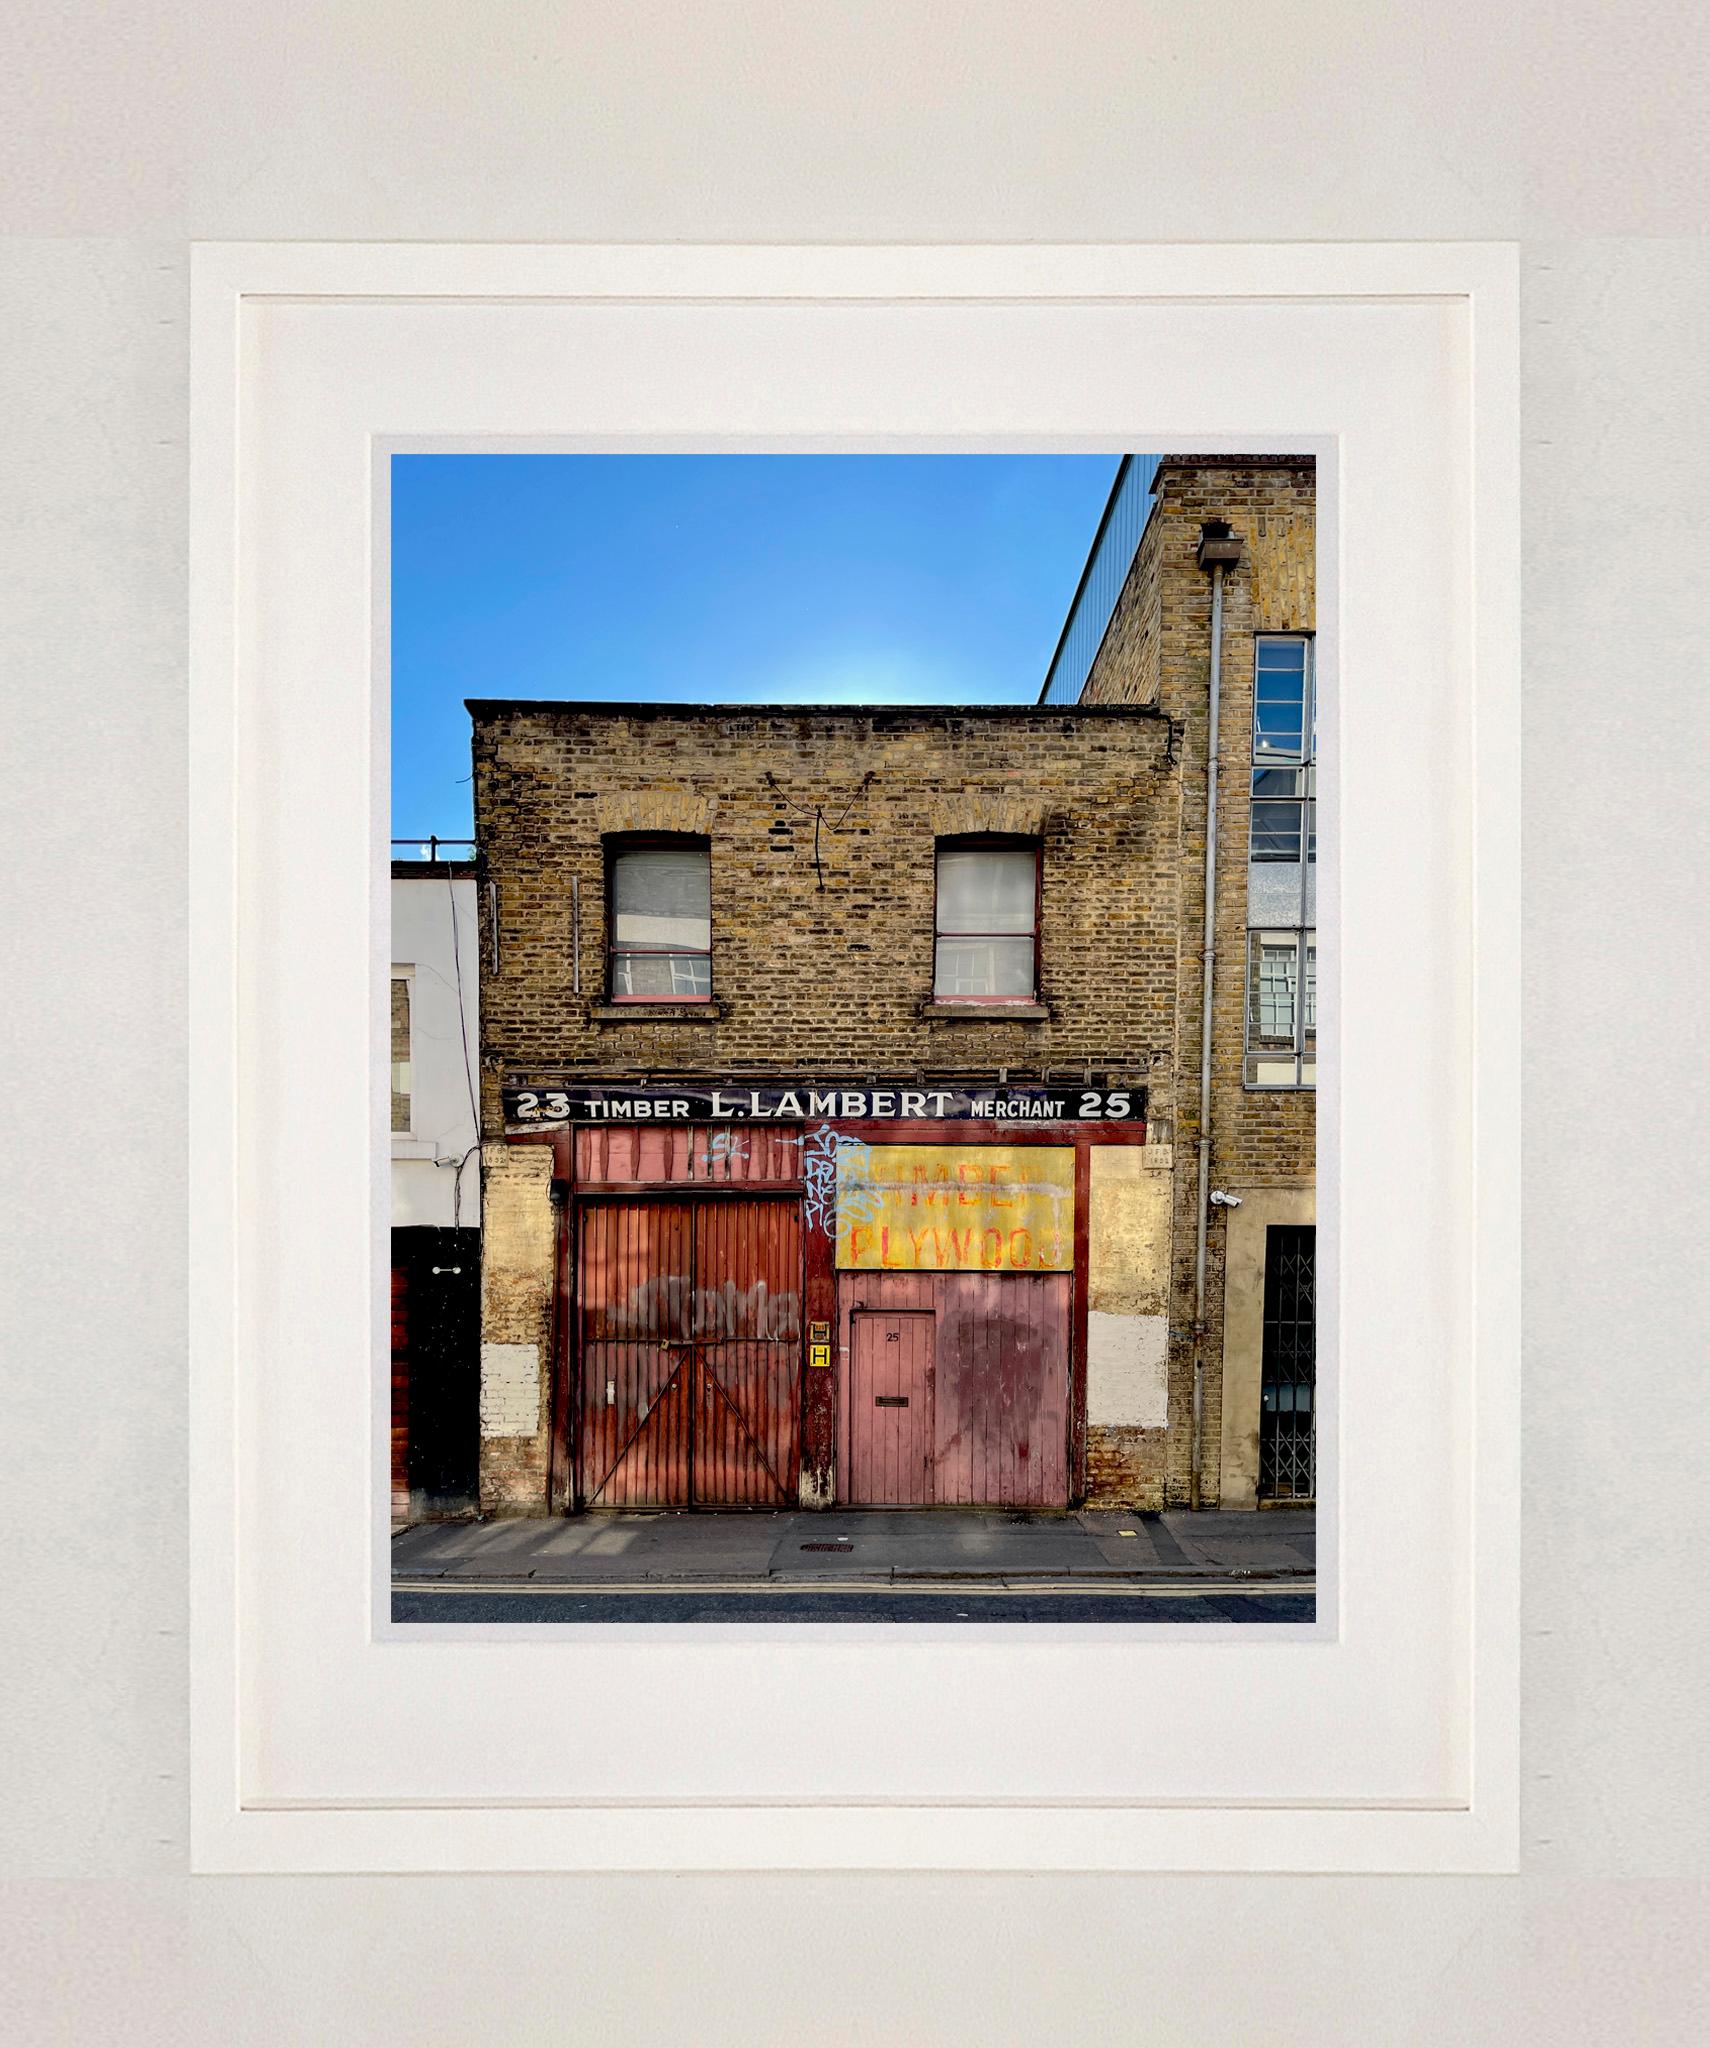 Timber Merchant, London - East London architecture street photography - Contemporary Print by Richard Heeps